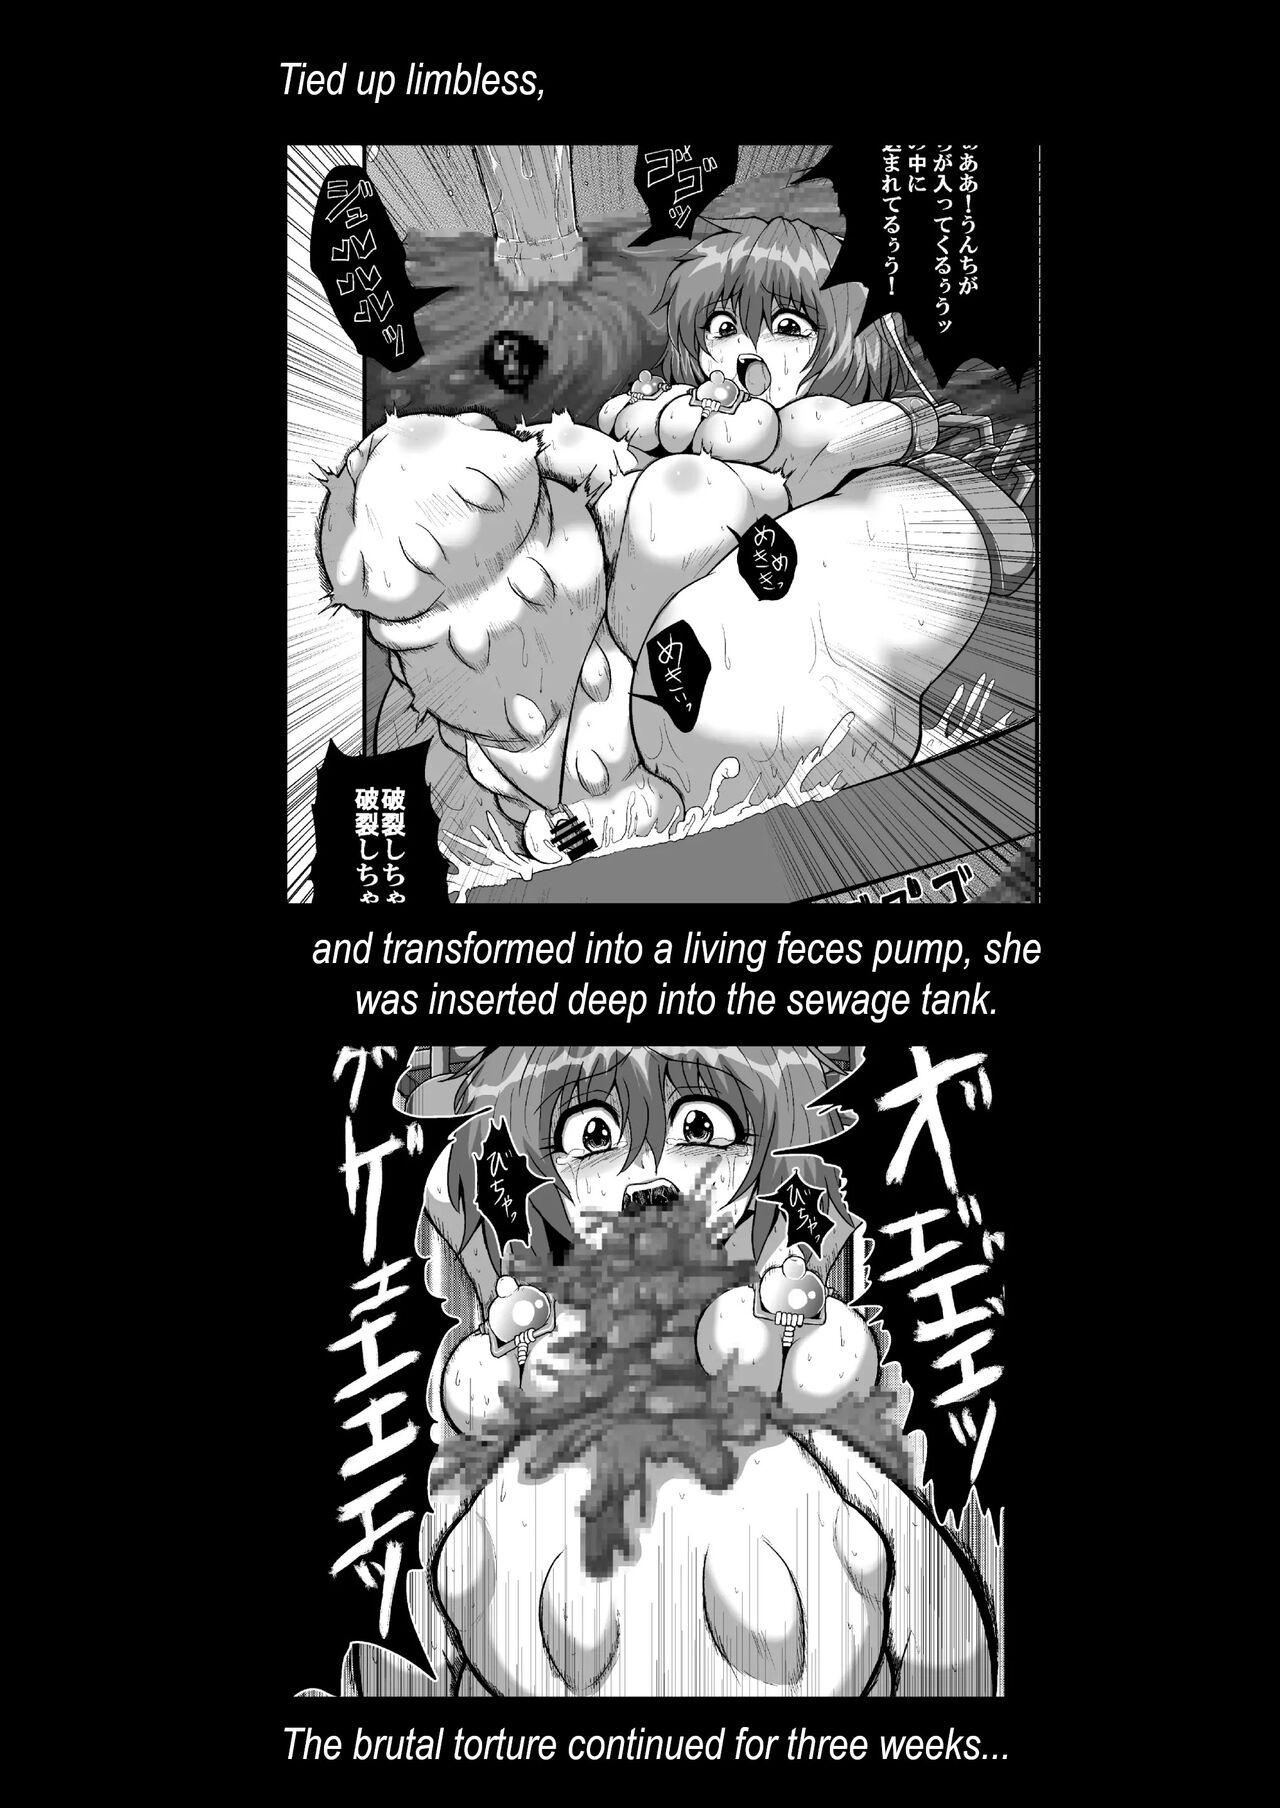 Exposed [Zuru] Marisa's thrill - Take care of yourself - 通り魔理沙にきをつけろ - Part 6 - Touhou project Moreno - Page 6